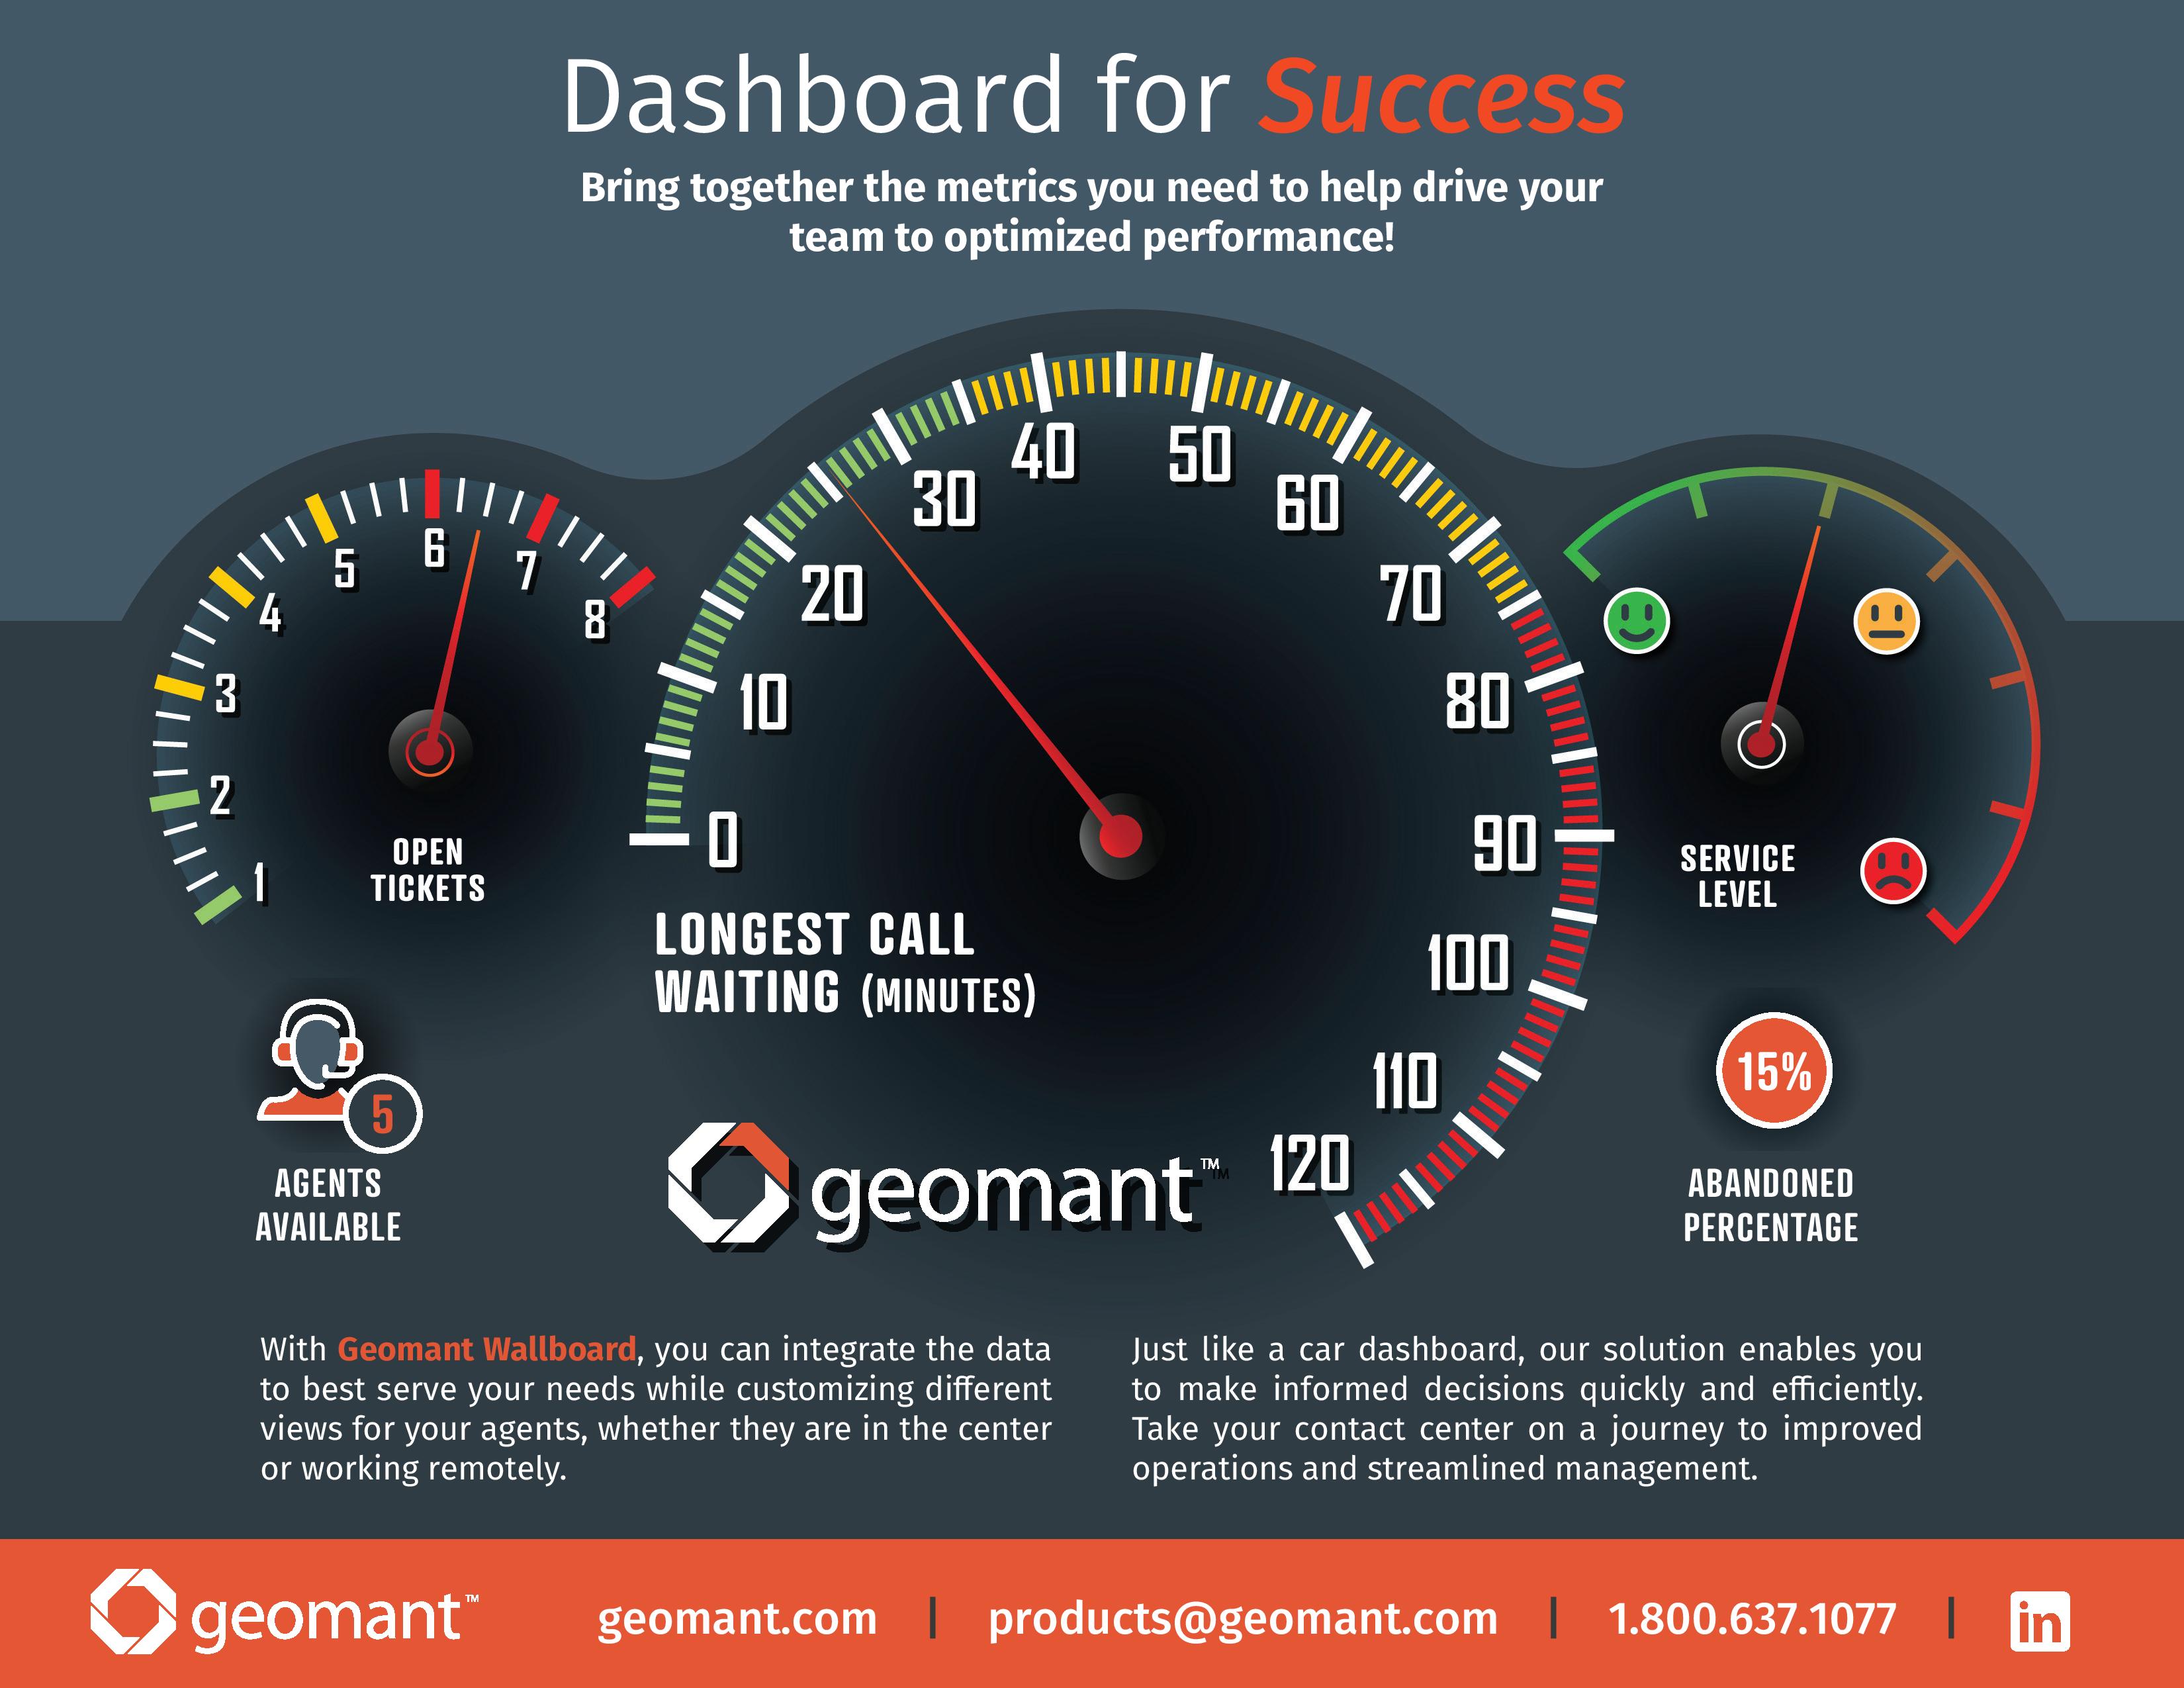 The Geomant Wallboard Dashboard for Success